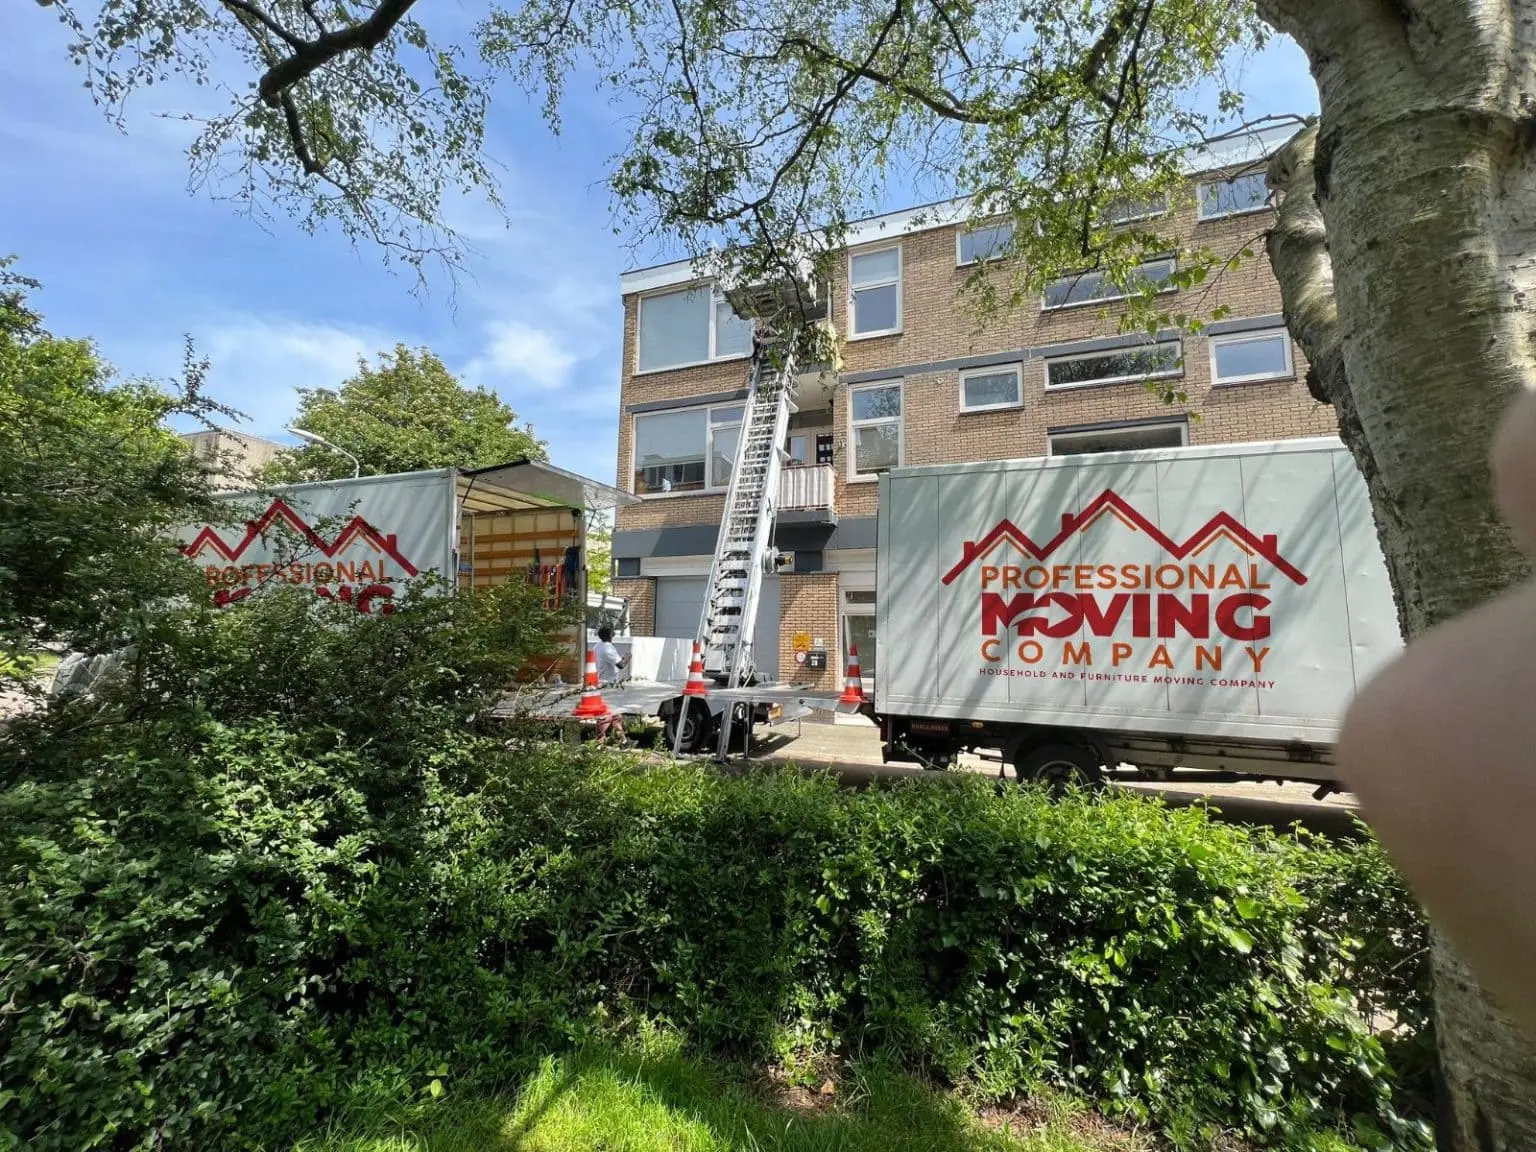 Moving company Nissewaard Professional Moving Company 2